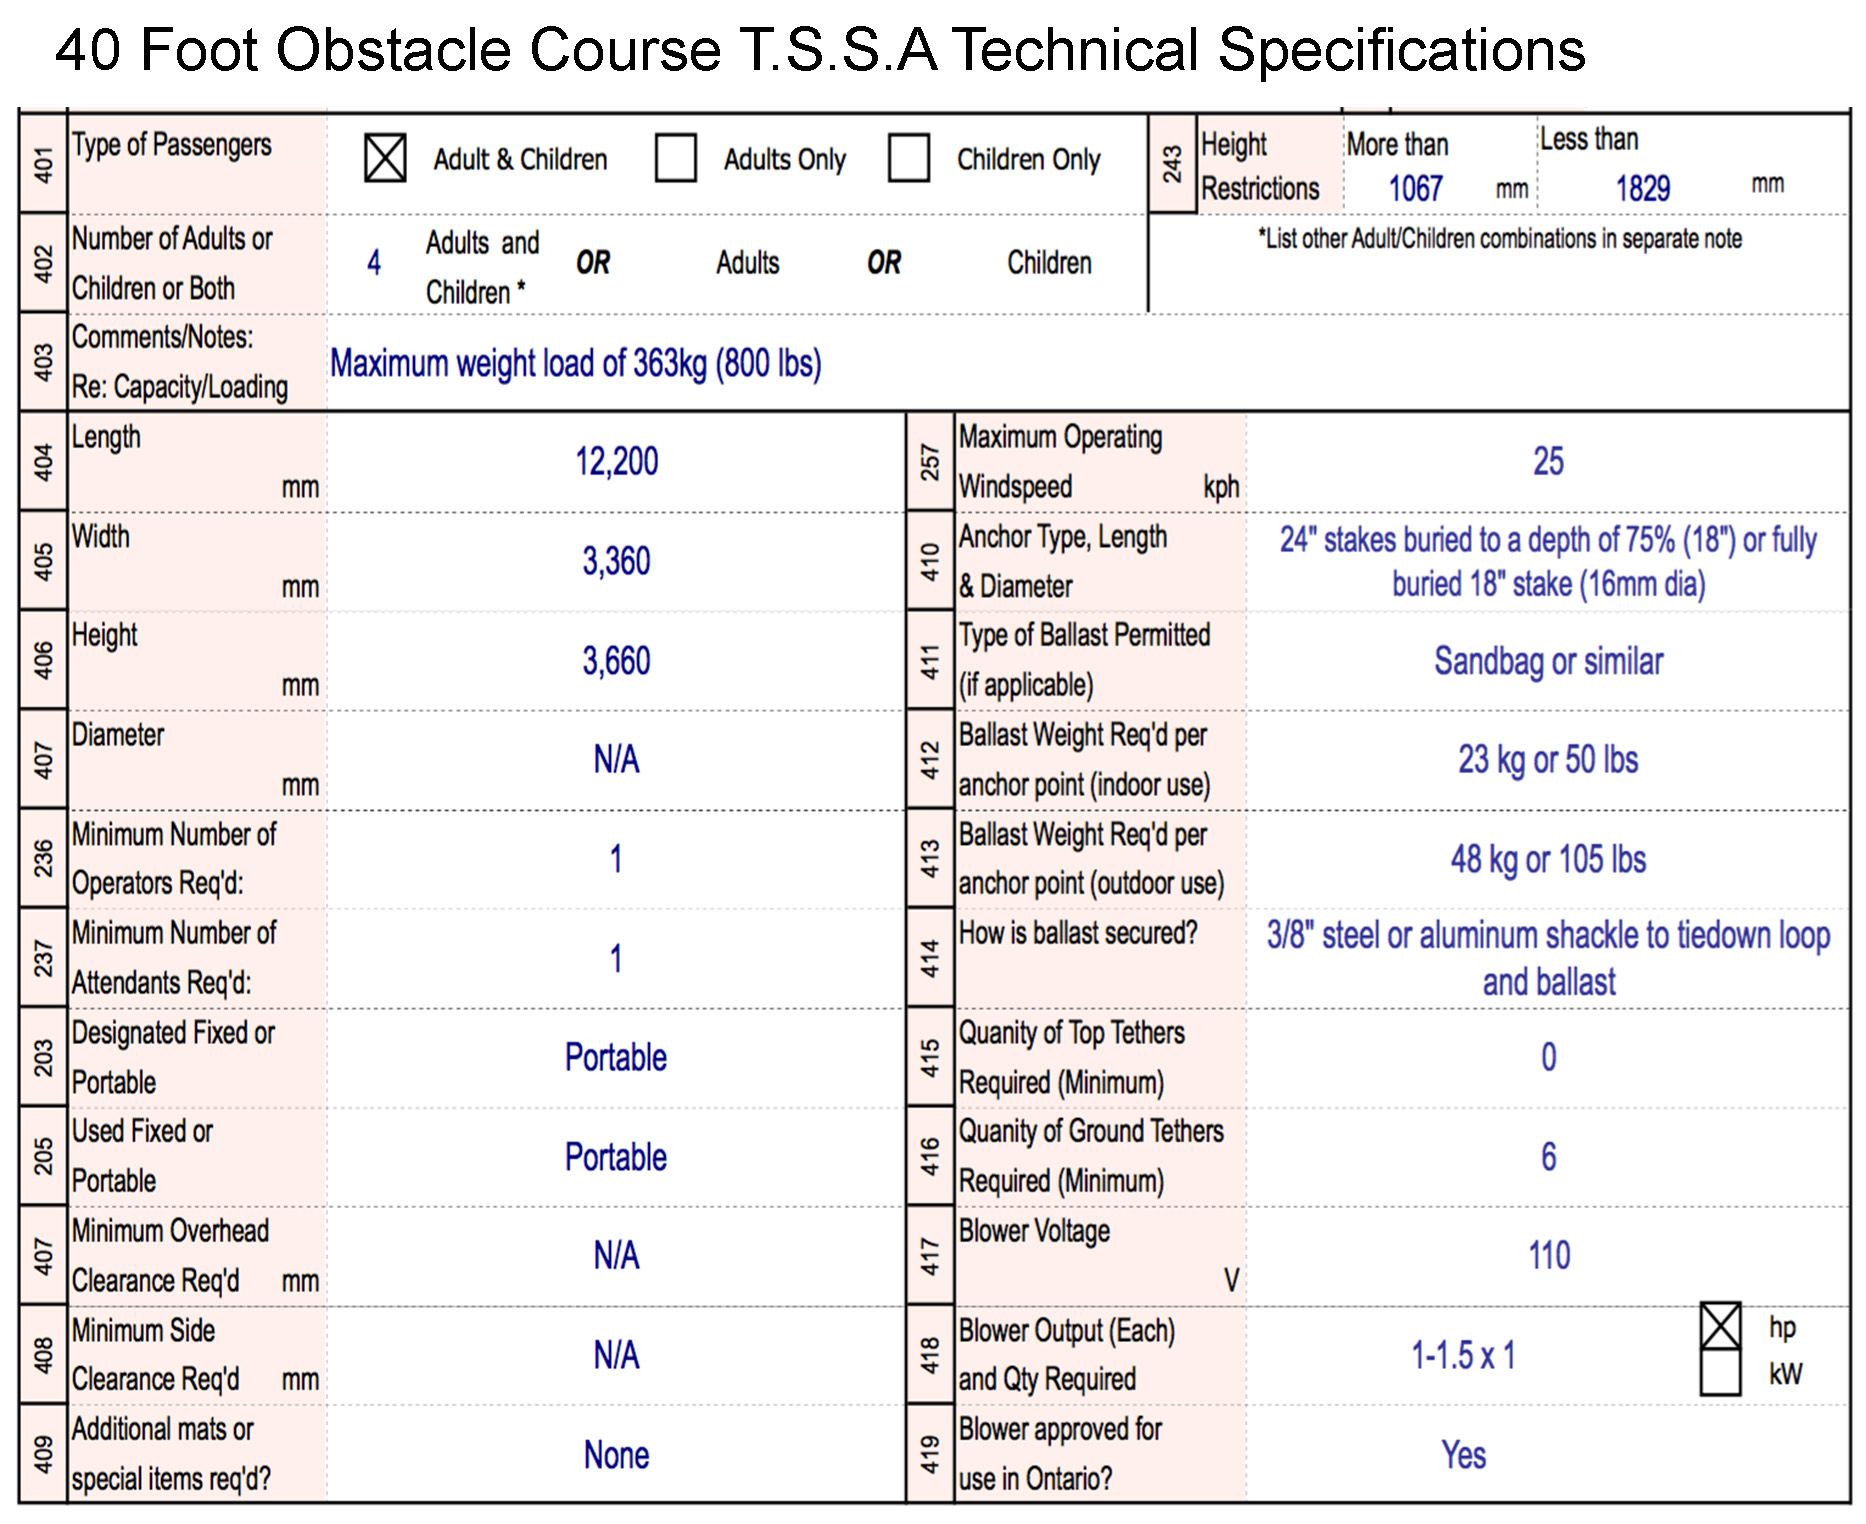 SPECS 40 Foot Obstacle Course compressed